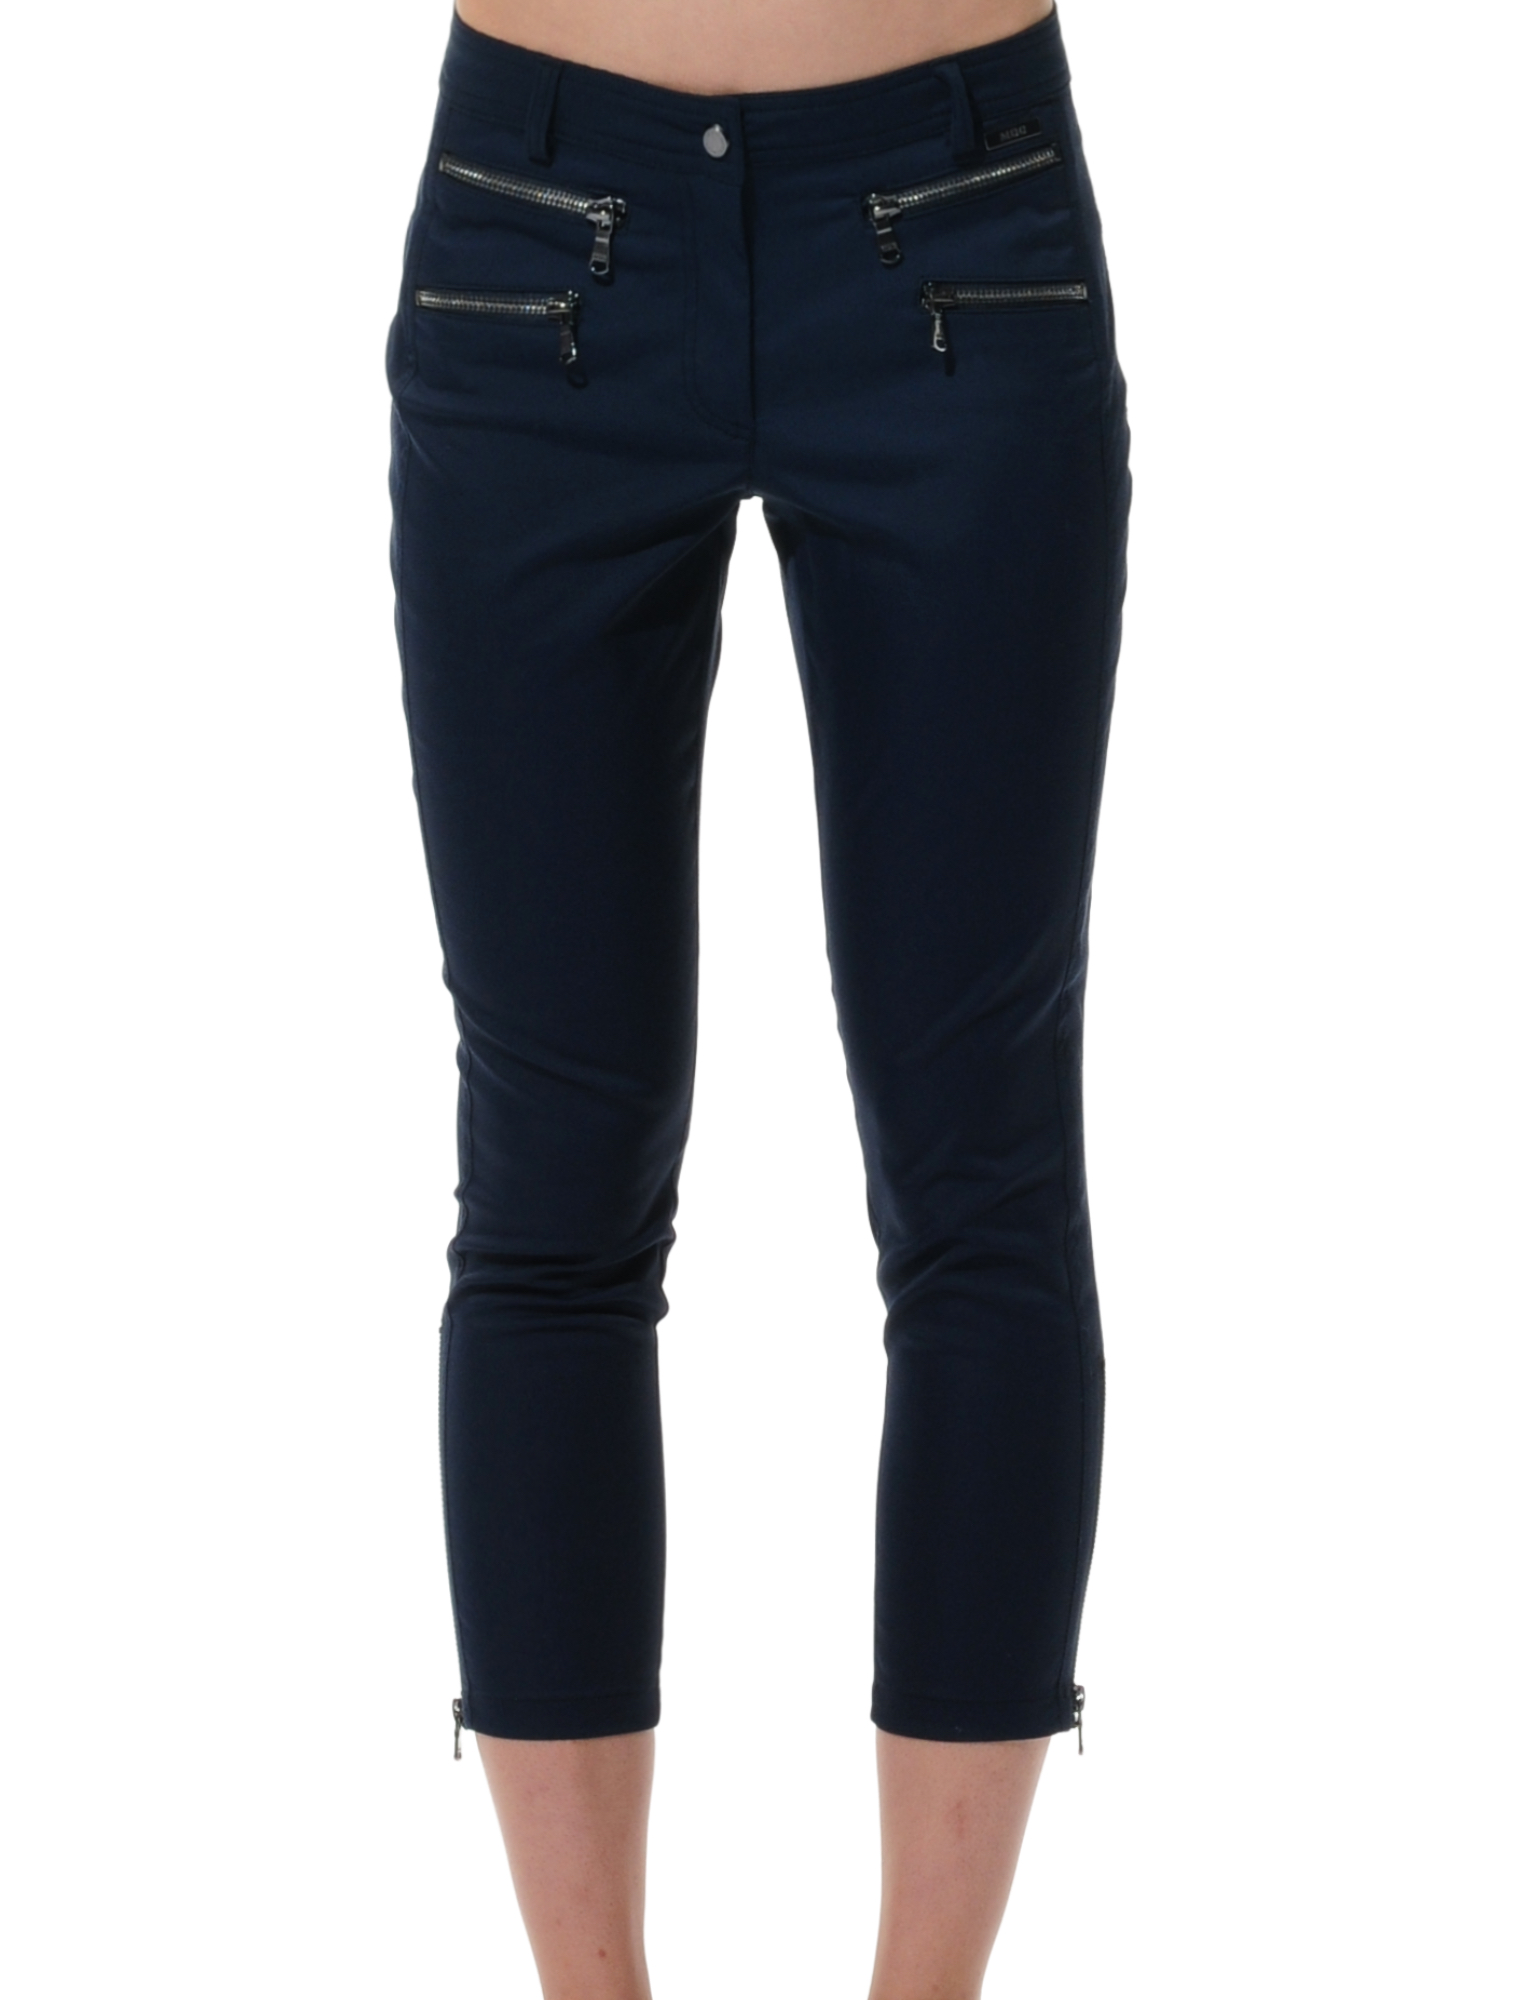 shiny stretch double zip cropped pants navy